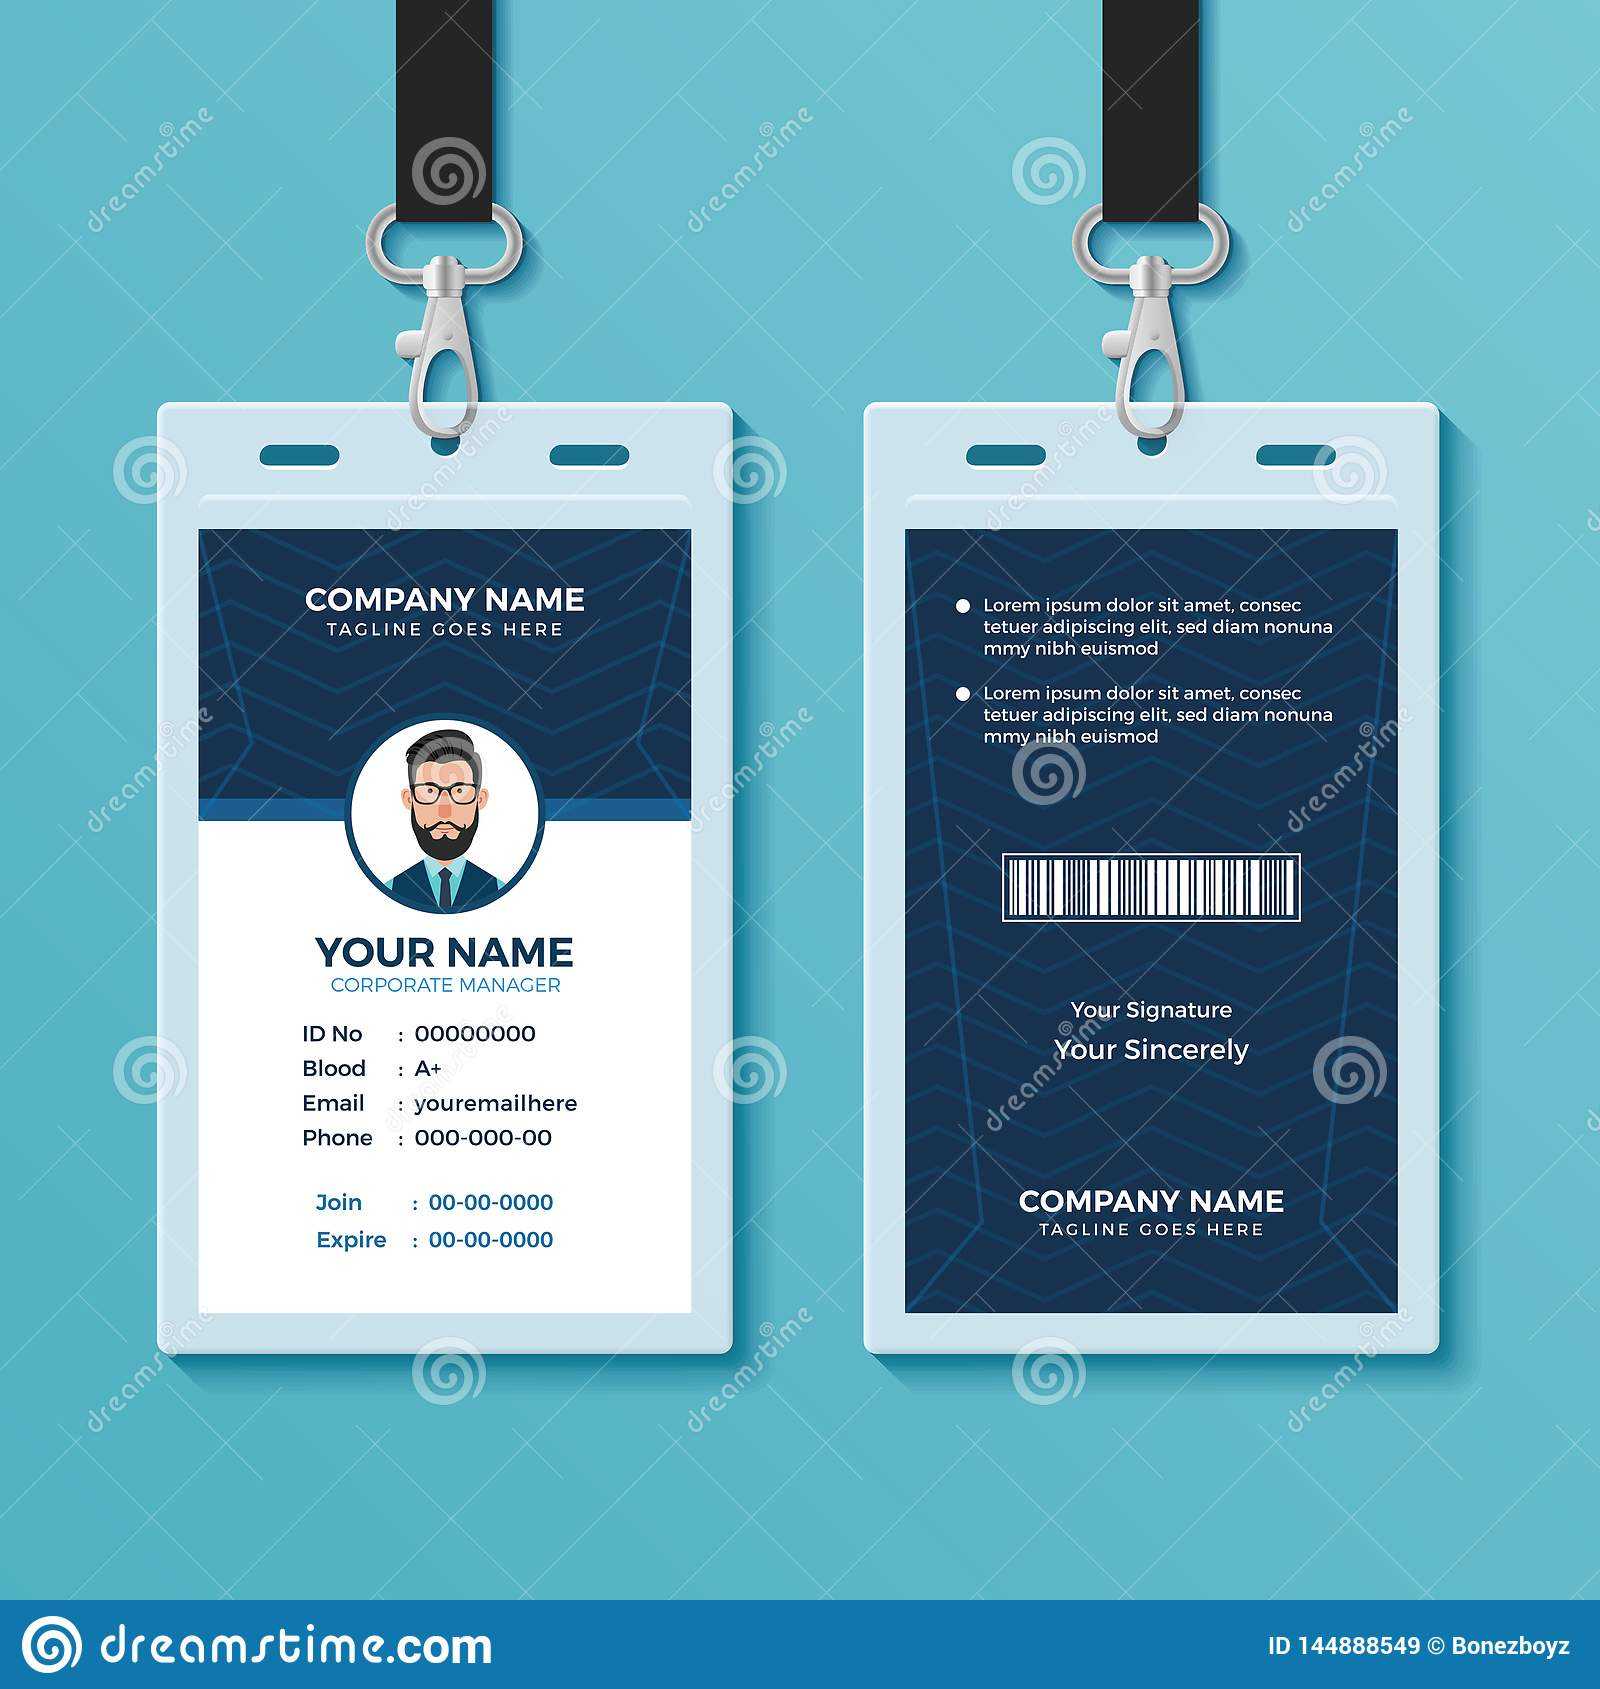 Modern And Clean Id Card Design Template Stock Vector With Regard To Company Id Card Design Template